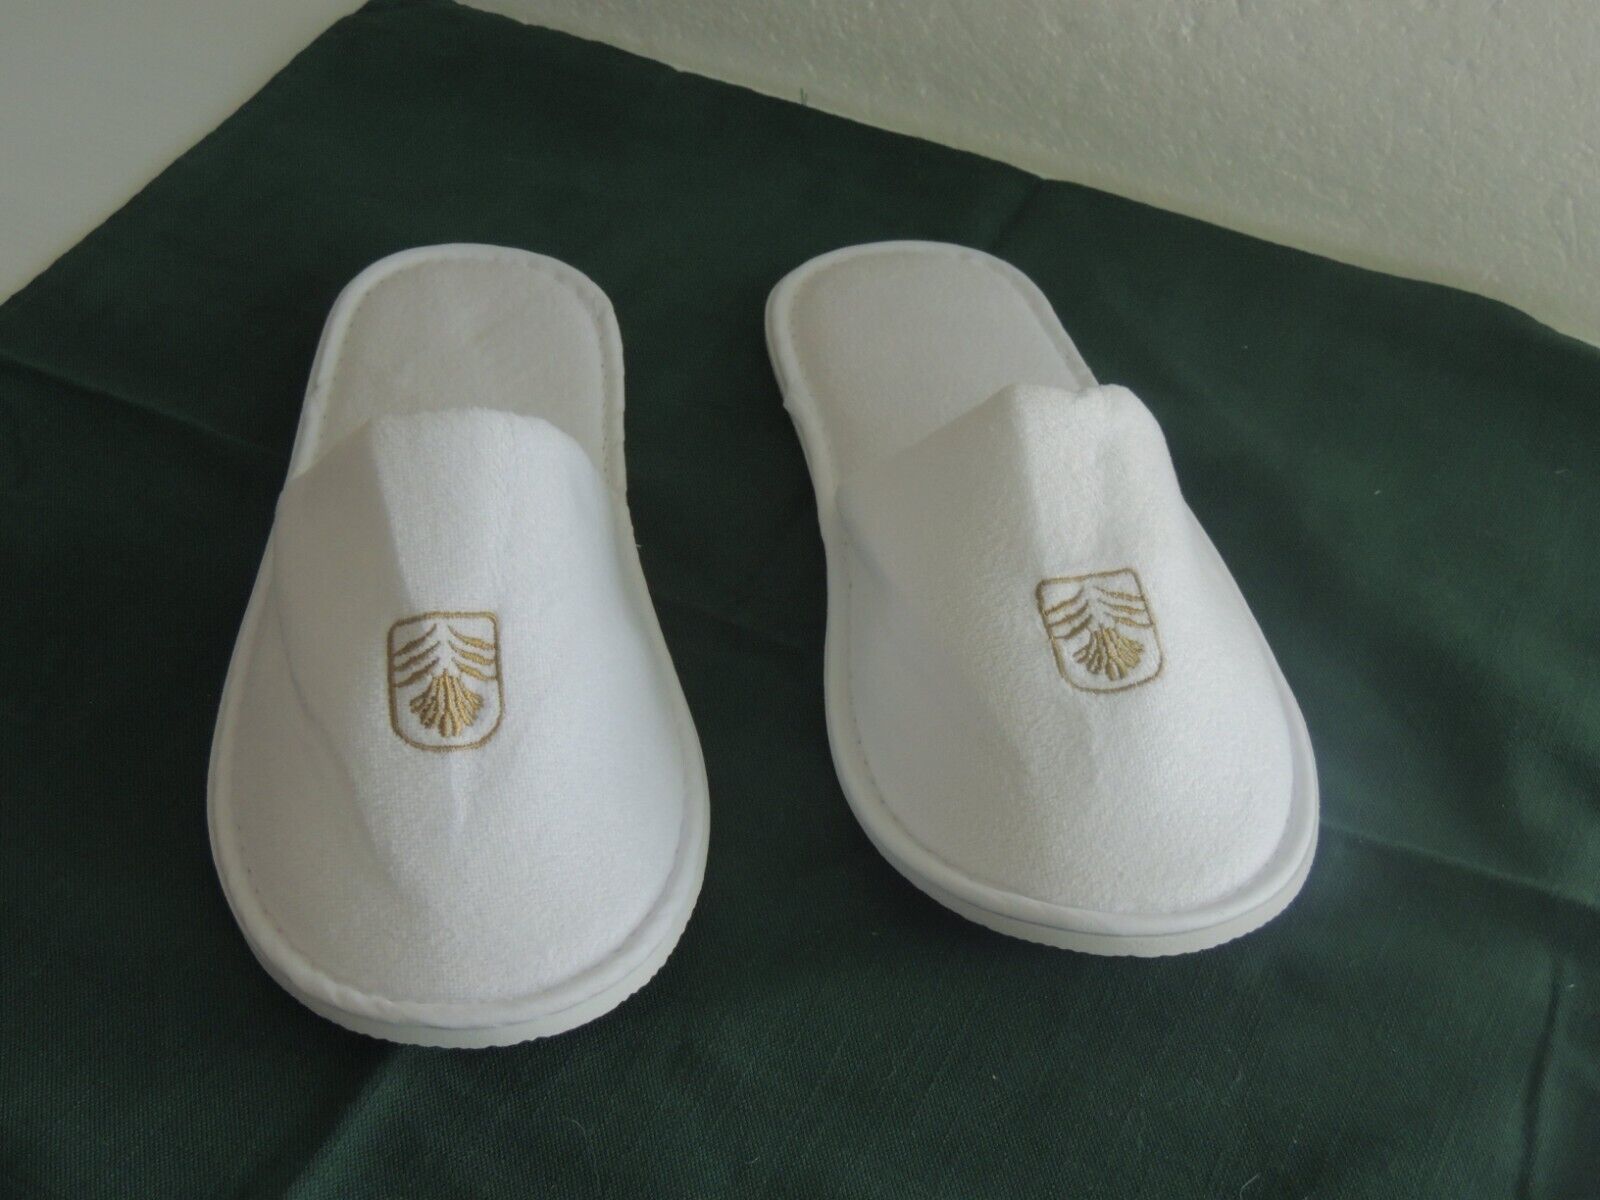 PARK ROYAL COLLECTION  MARINA BAY SINGAPORE  HOTEL SLIPPERS LARGE MEN 2 PAIR